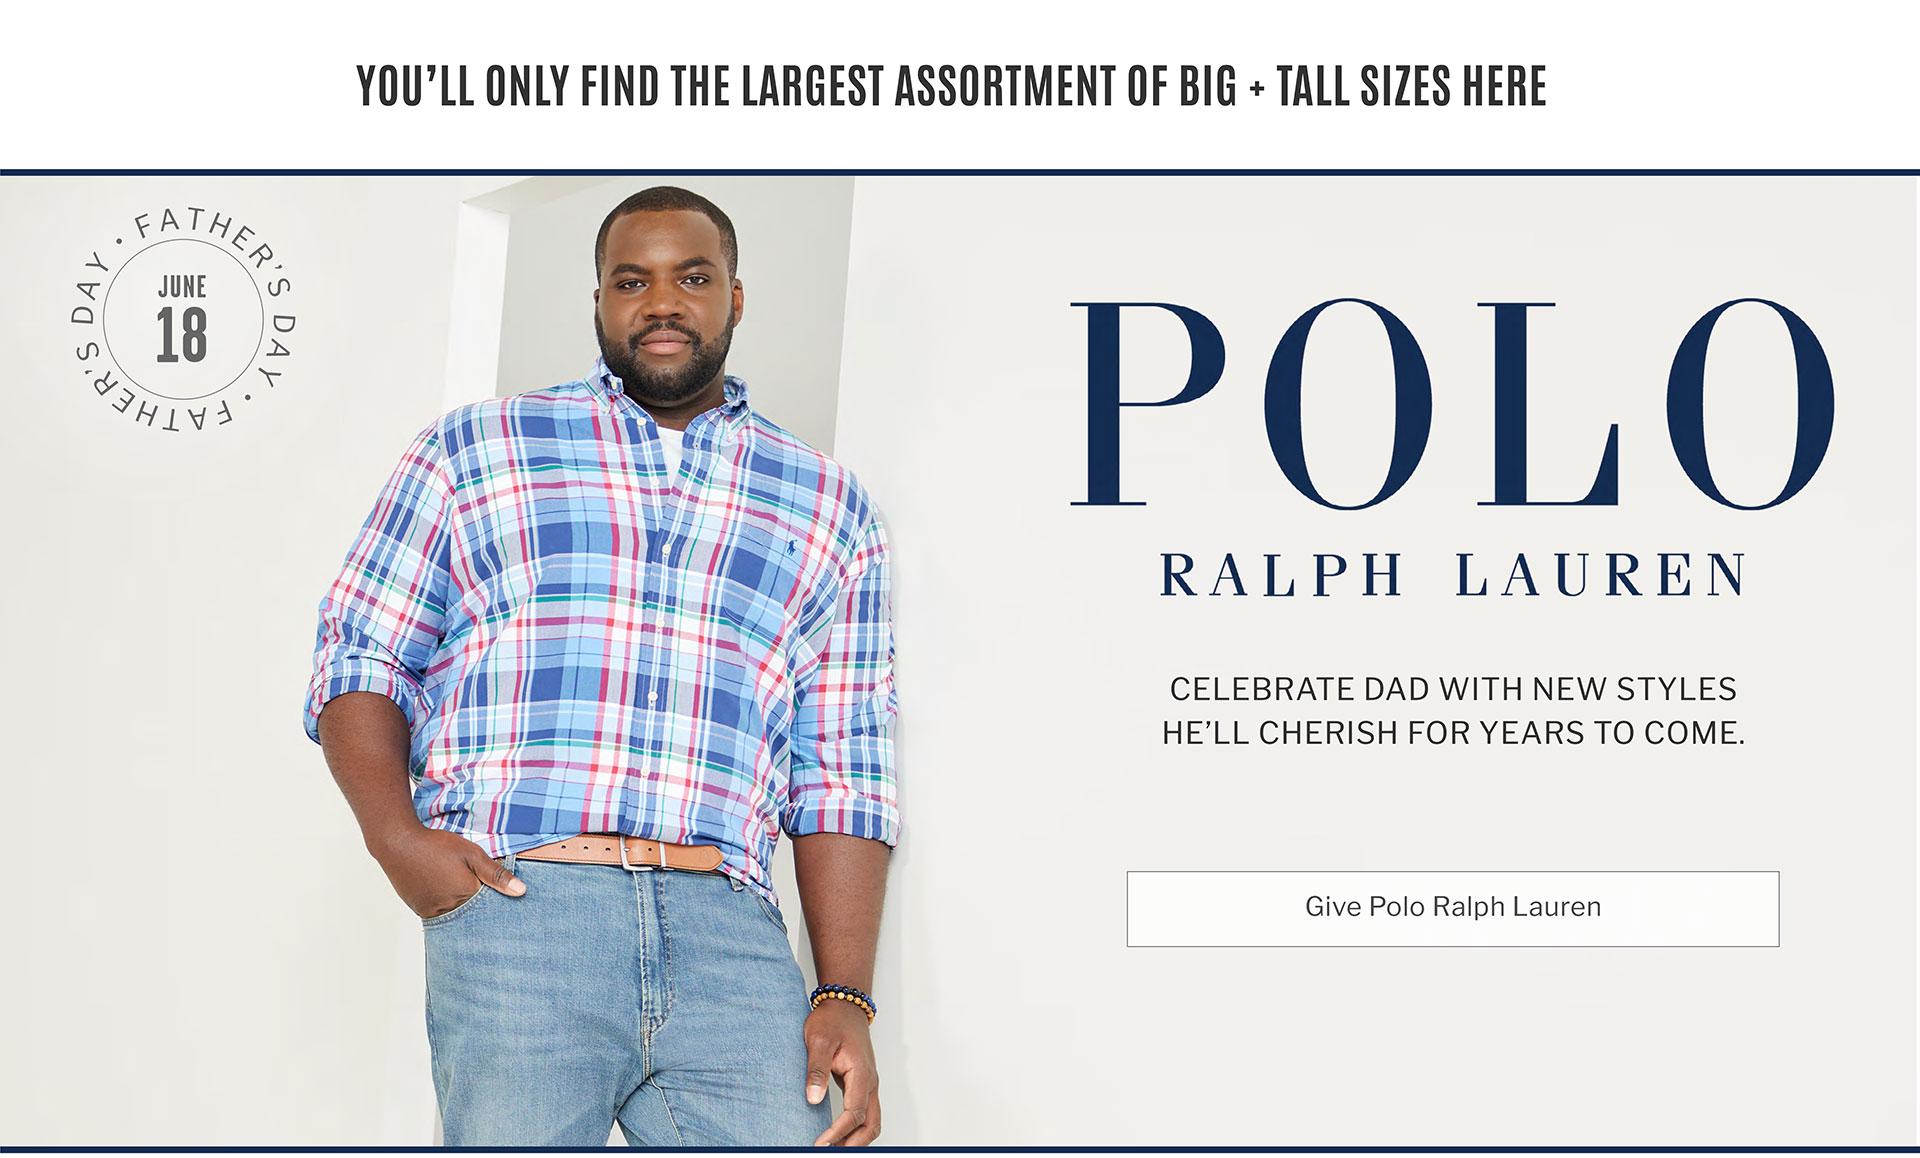 POLO RALPH LAUREN | CELEBRATE DAD WITH NEW STYLES HE’LL CHERISH FOR YEARS TO COME. | Give Polo Ralph Lauren